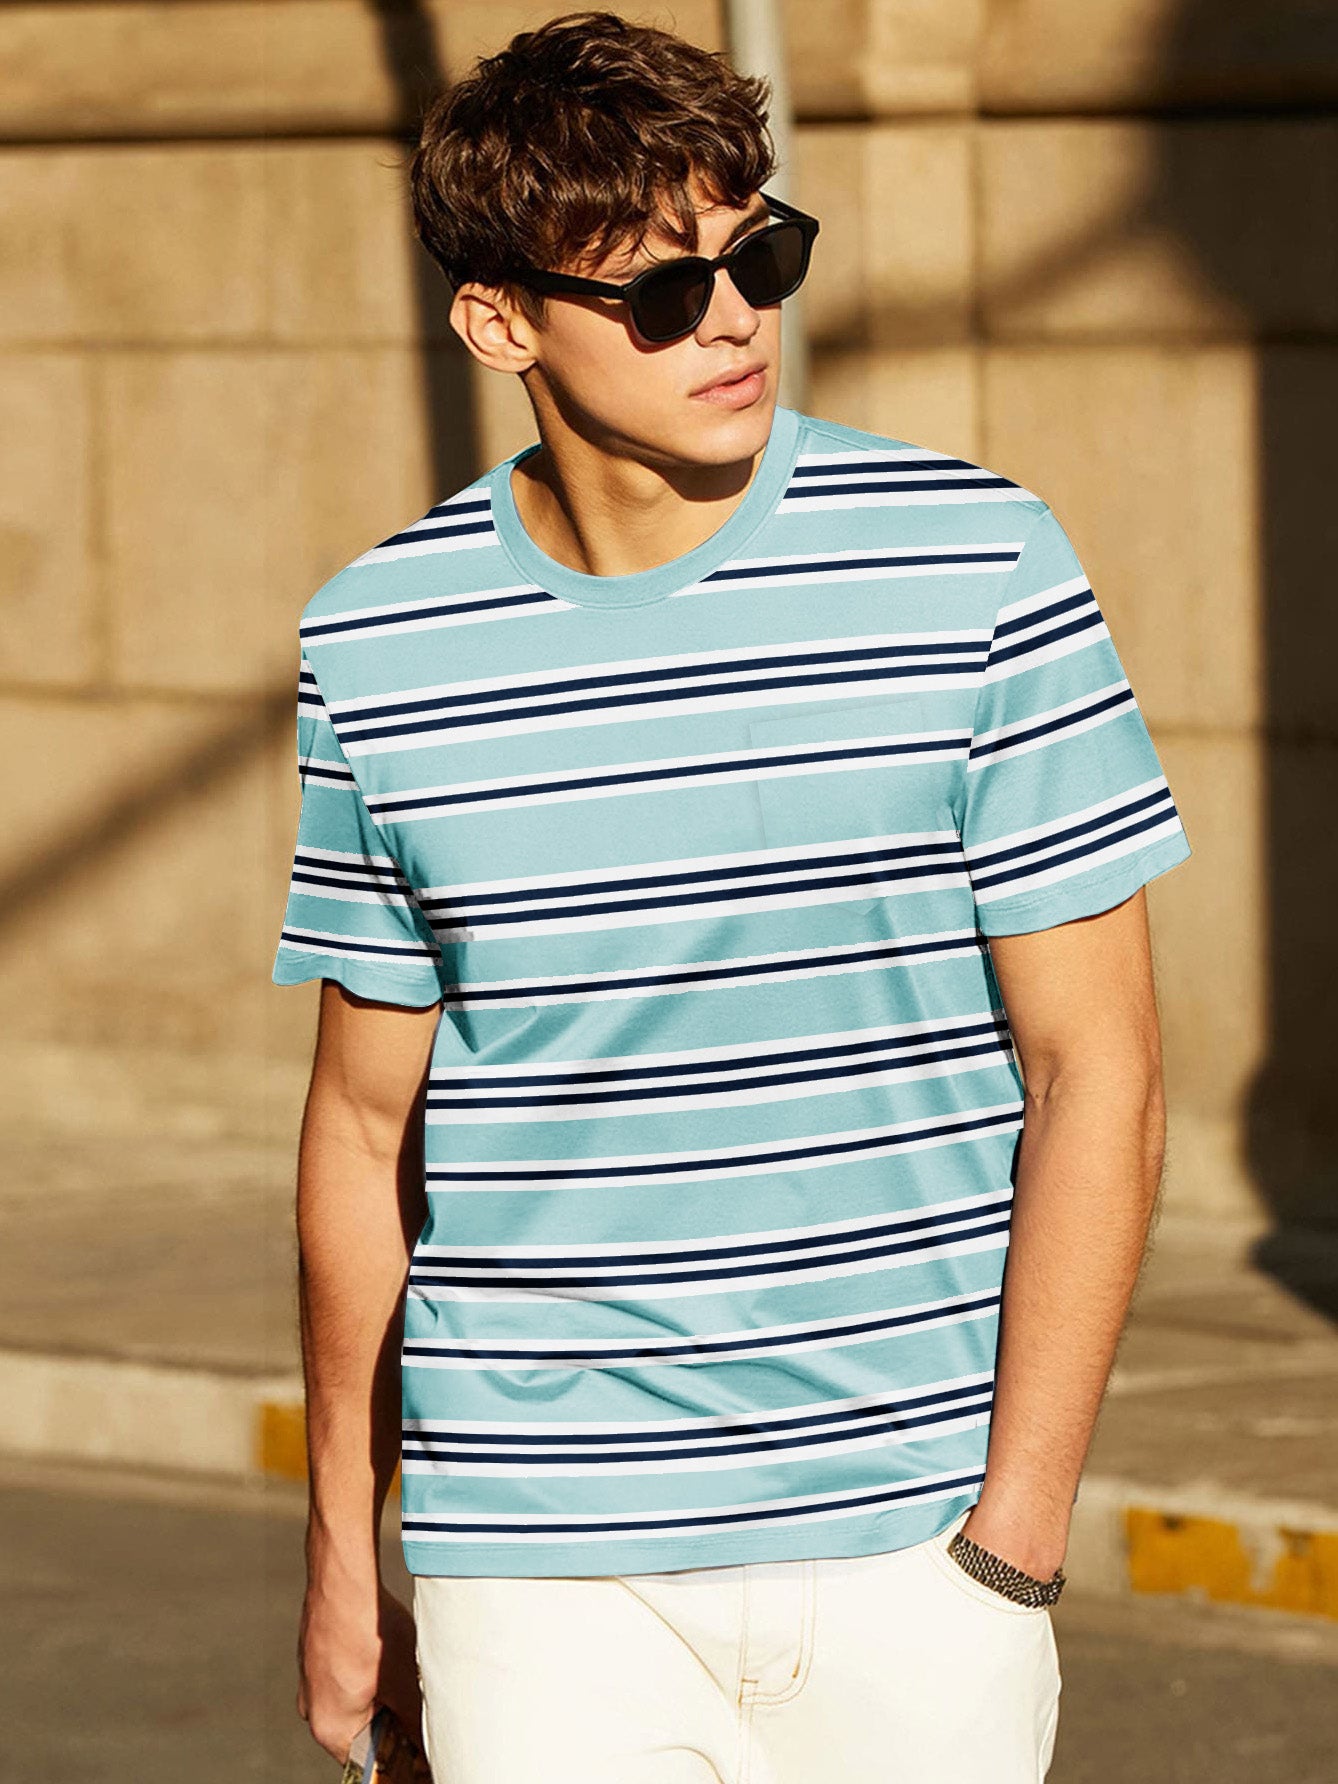 Orignal Single Jersey Crew Neck Tee Shirt For Men-Blue With Stripes-SP1736/RT2425